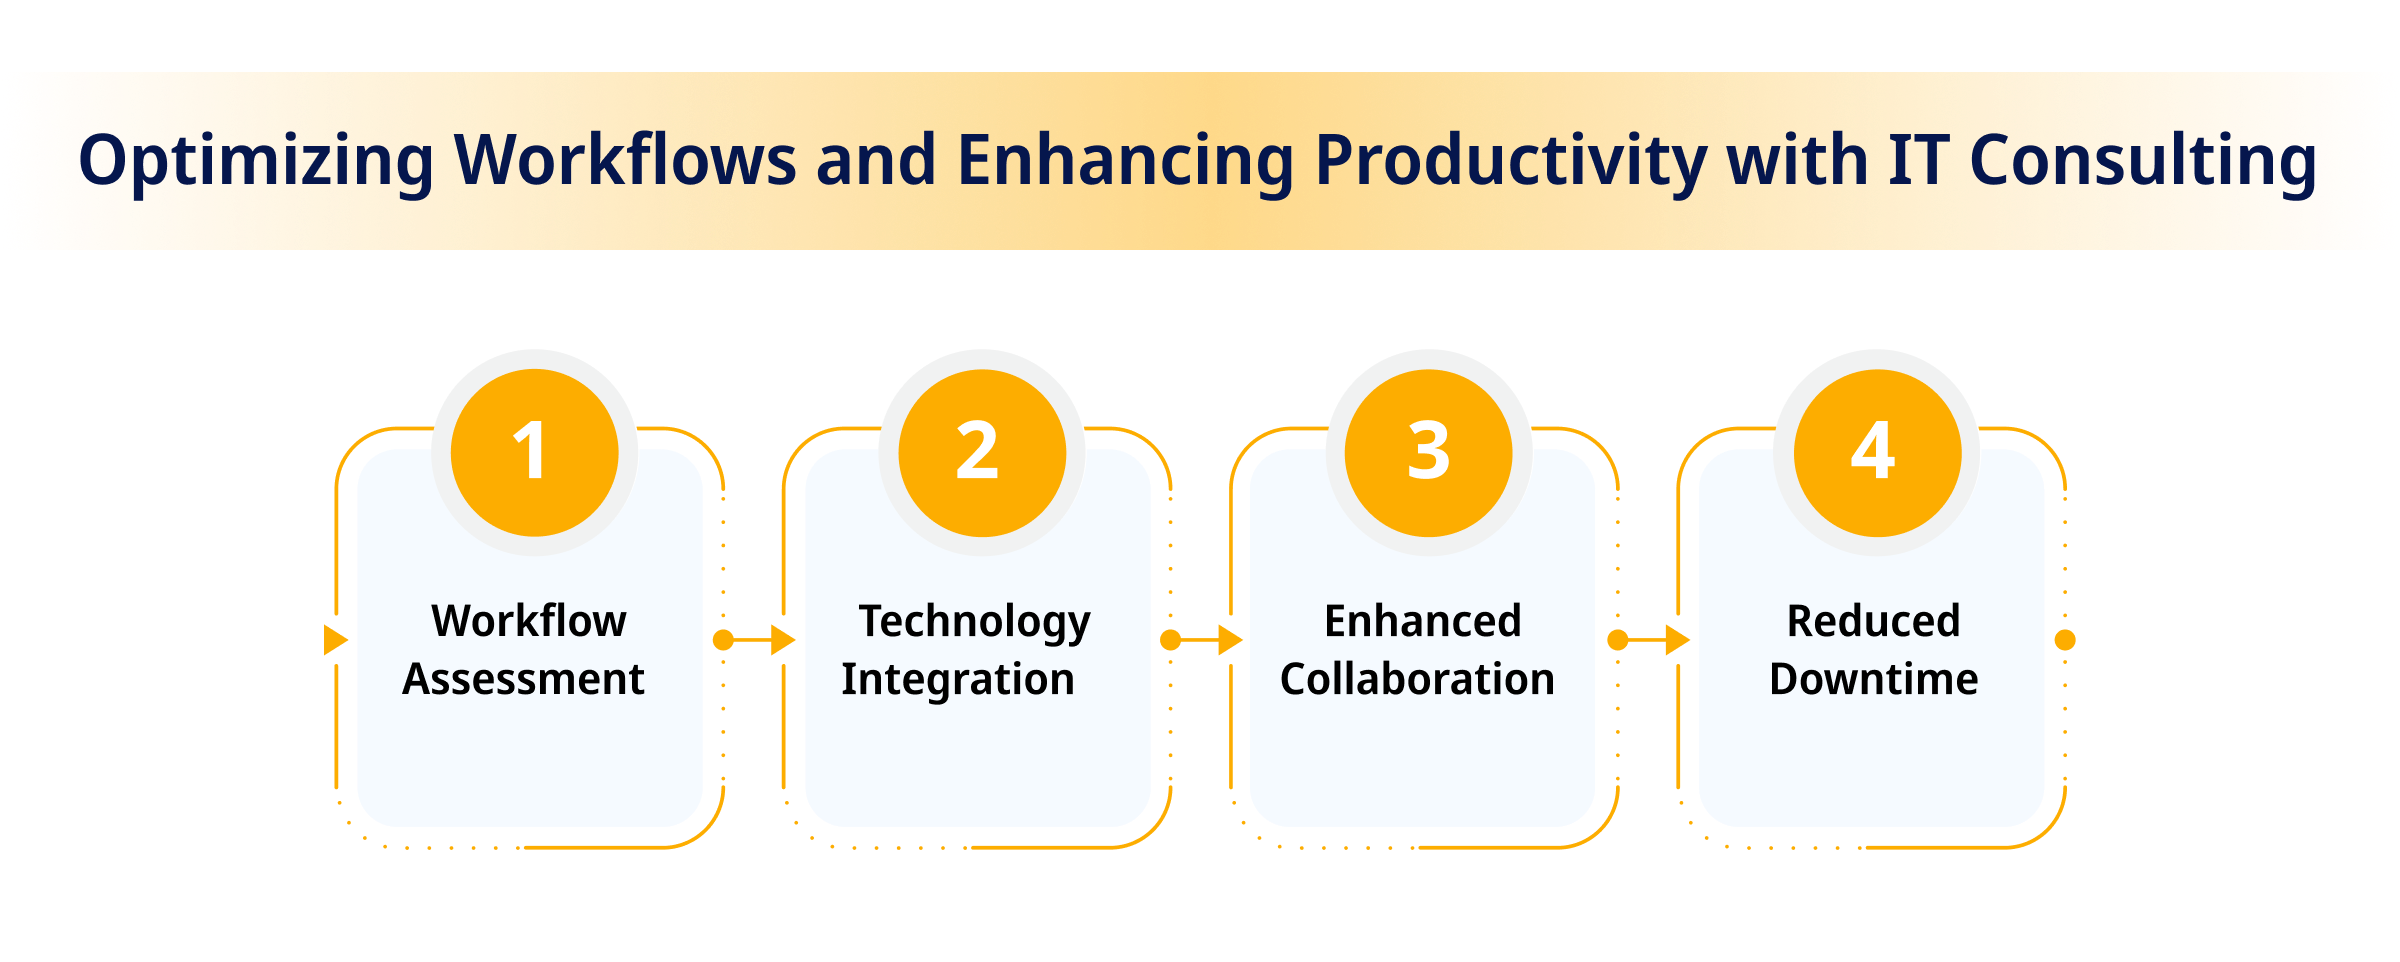 Optimizing Workflows and Enhancing Productivity with IT Consulting